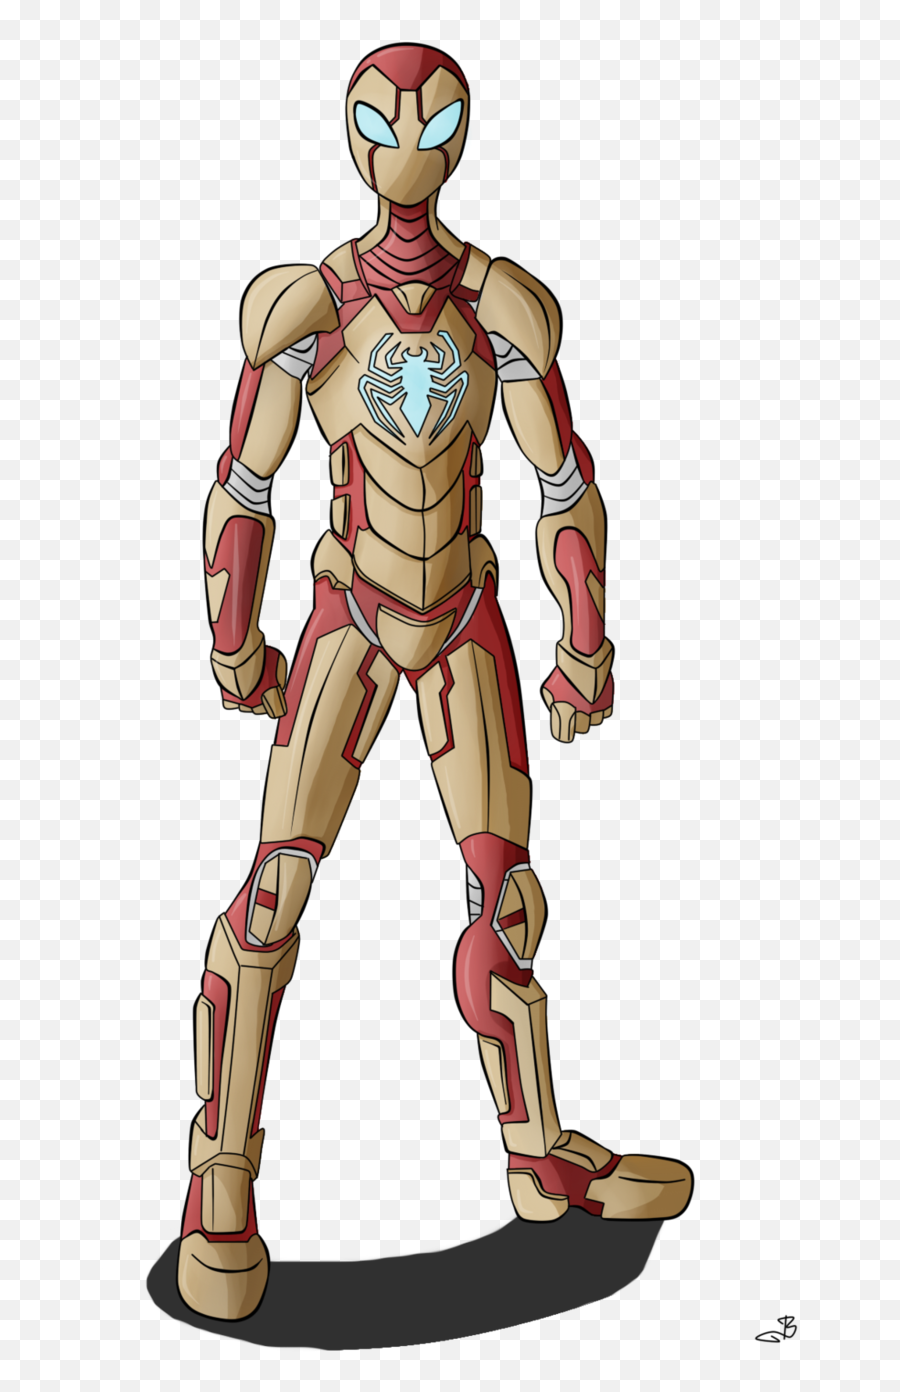 Iron Spiderman Png Transparent Image - Iron Spider Of Cartoon,Iron Spider Png